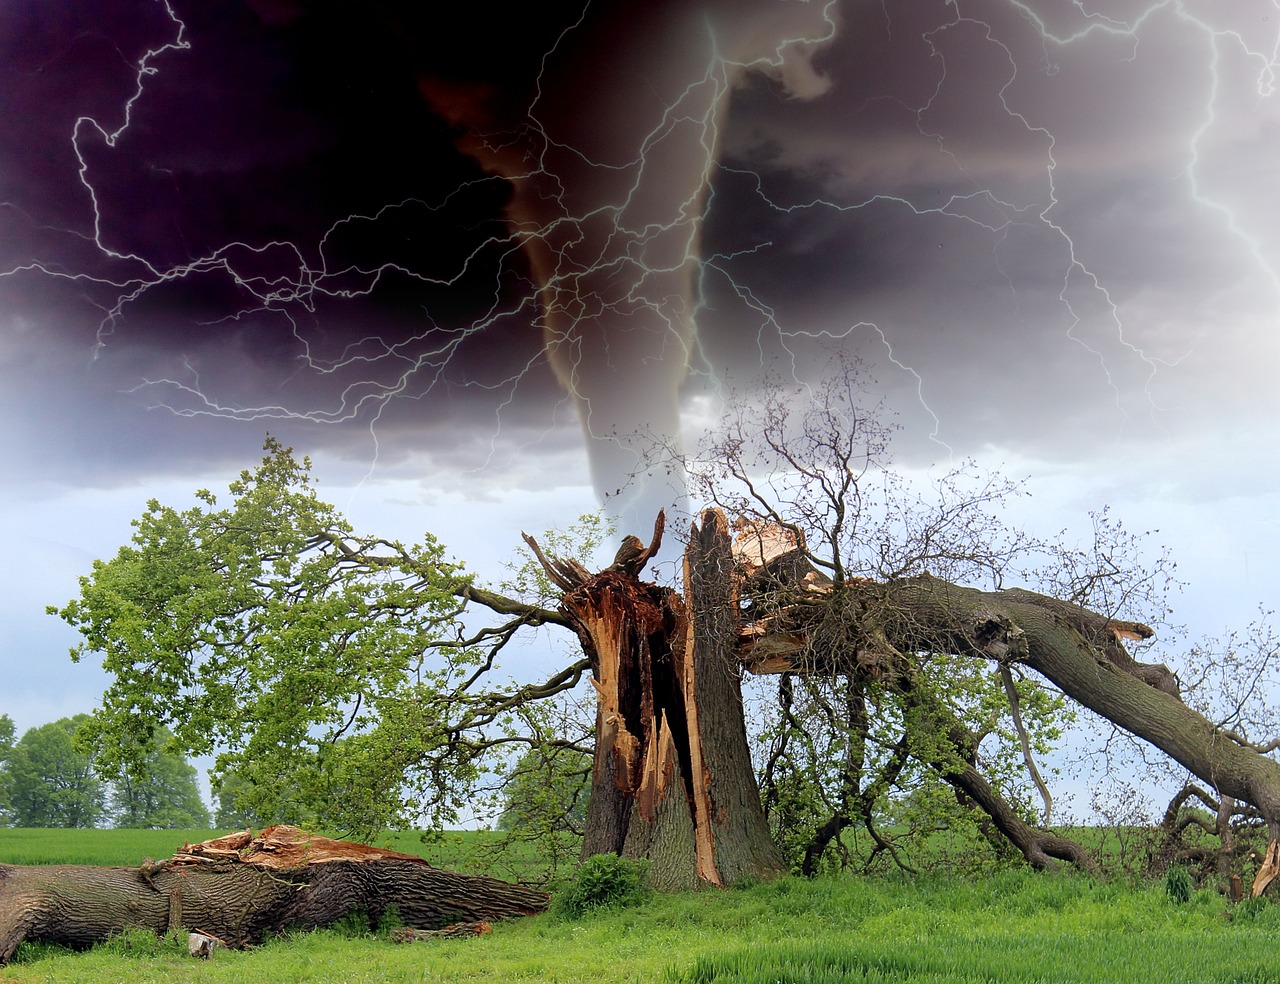 A lightning strike destroyed a tree, and a tornado forms behind